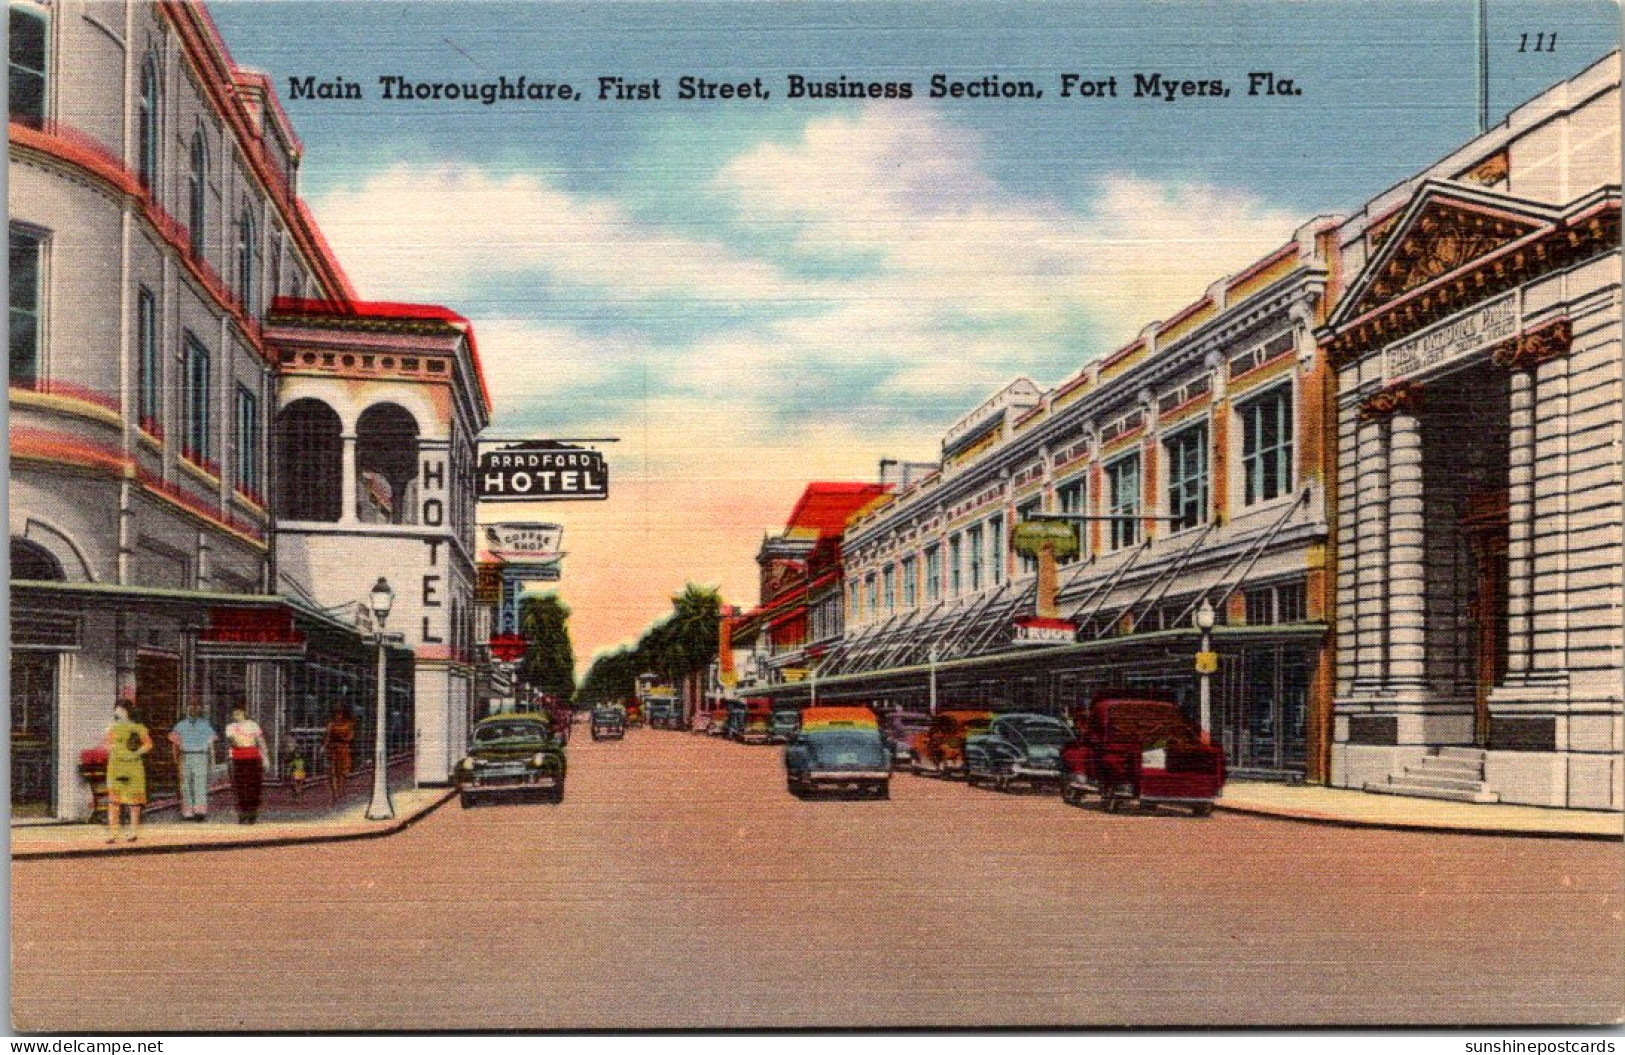 Florida Fort Myers Main Thoroughfare First Street Business Section  - Fort Myers